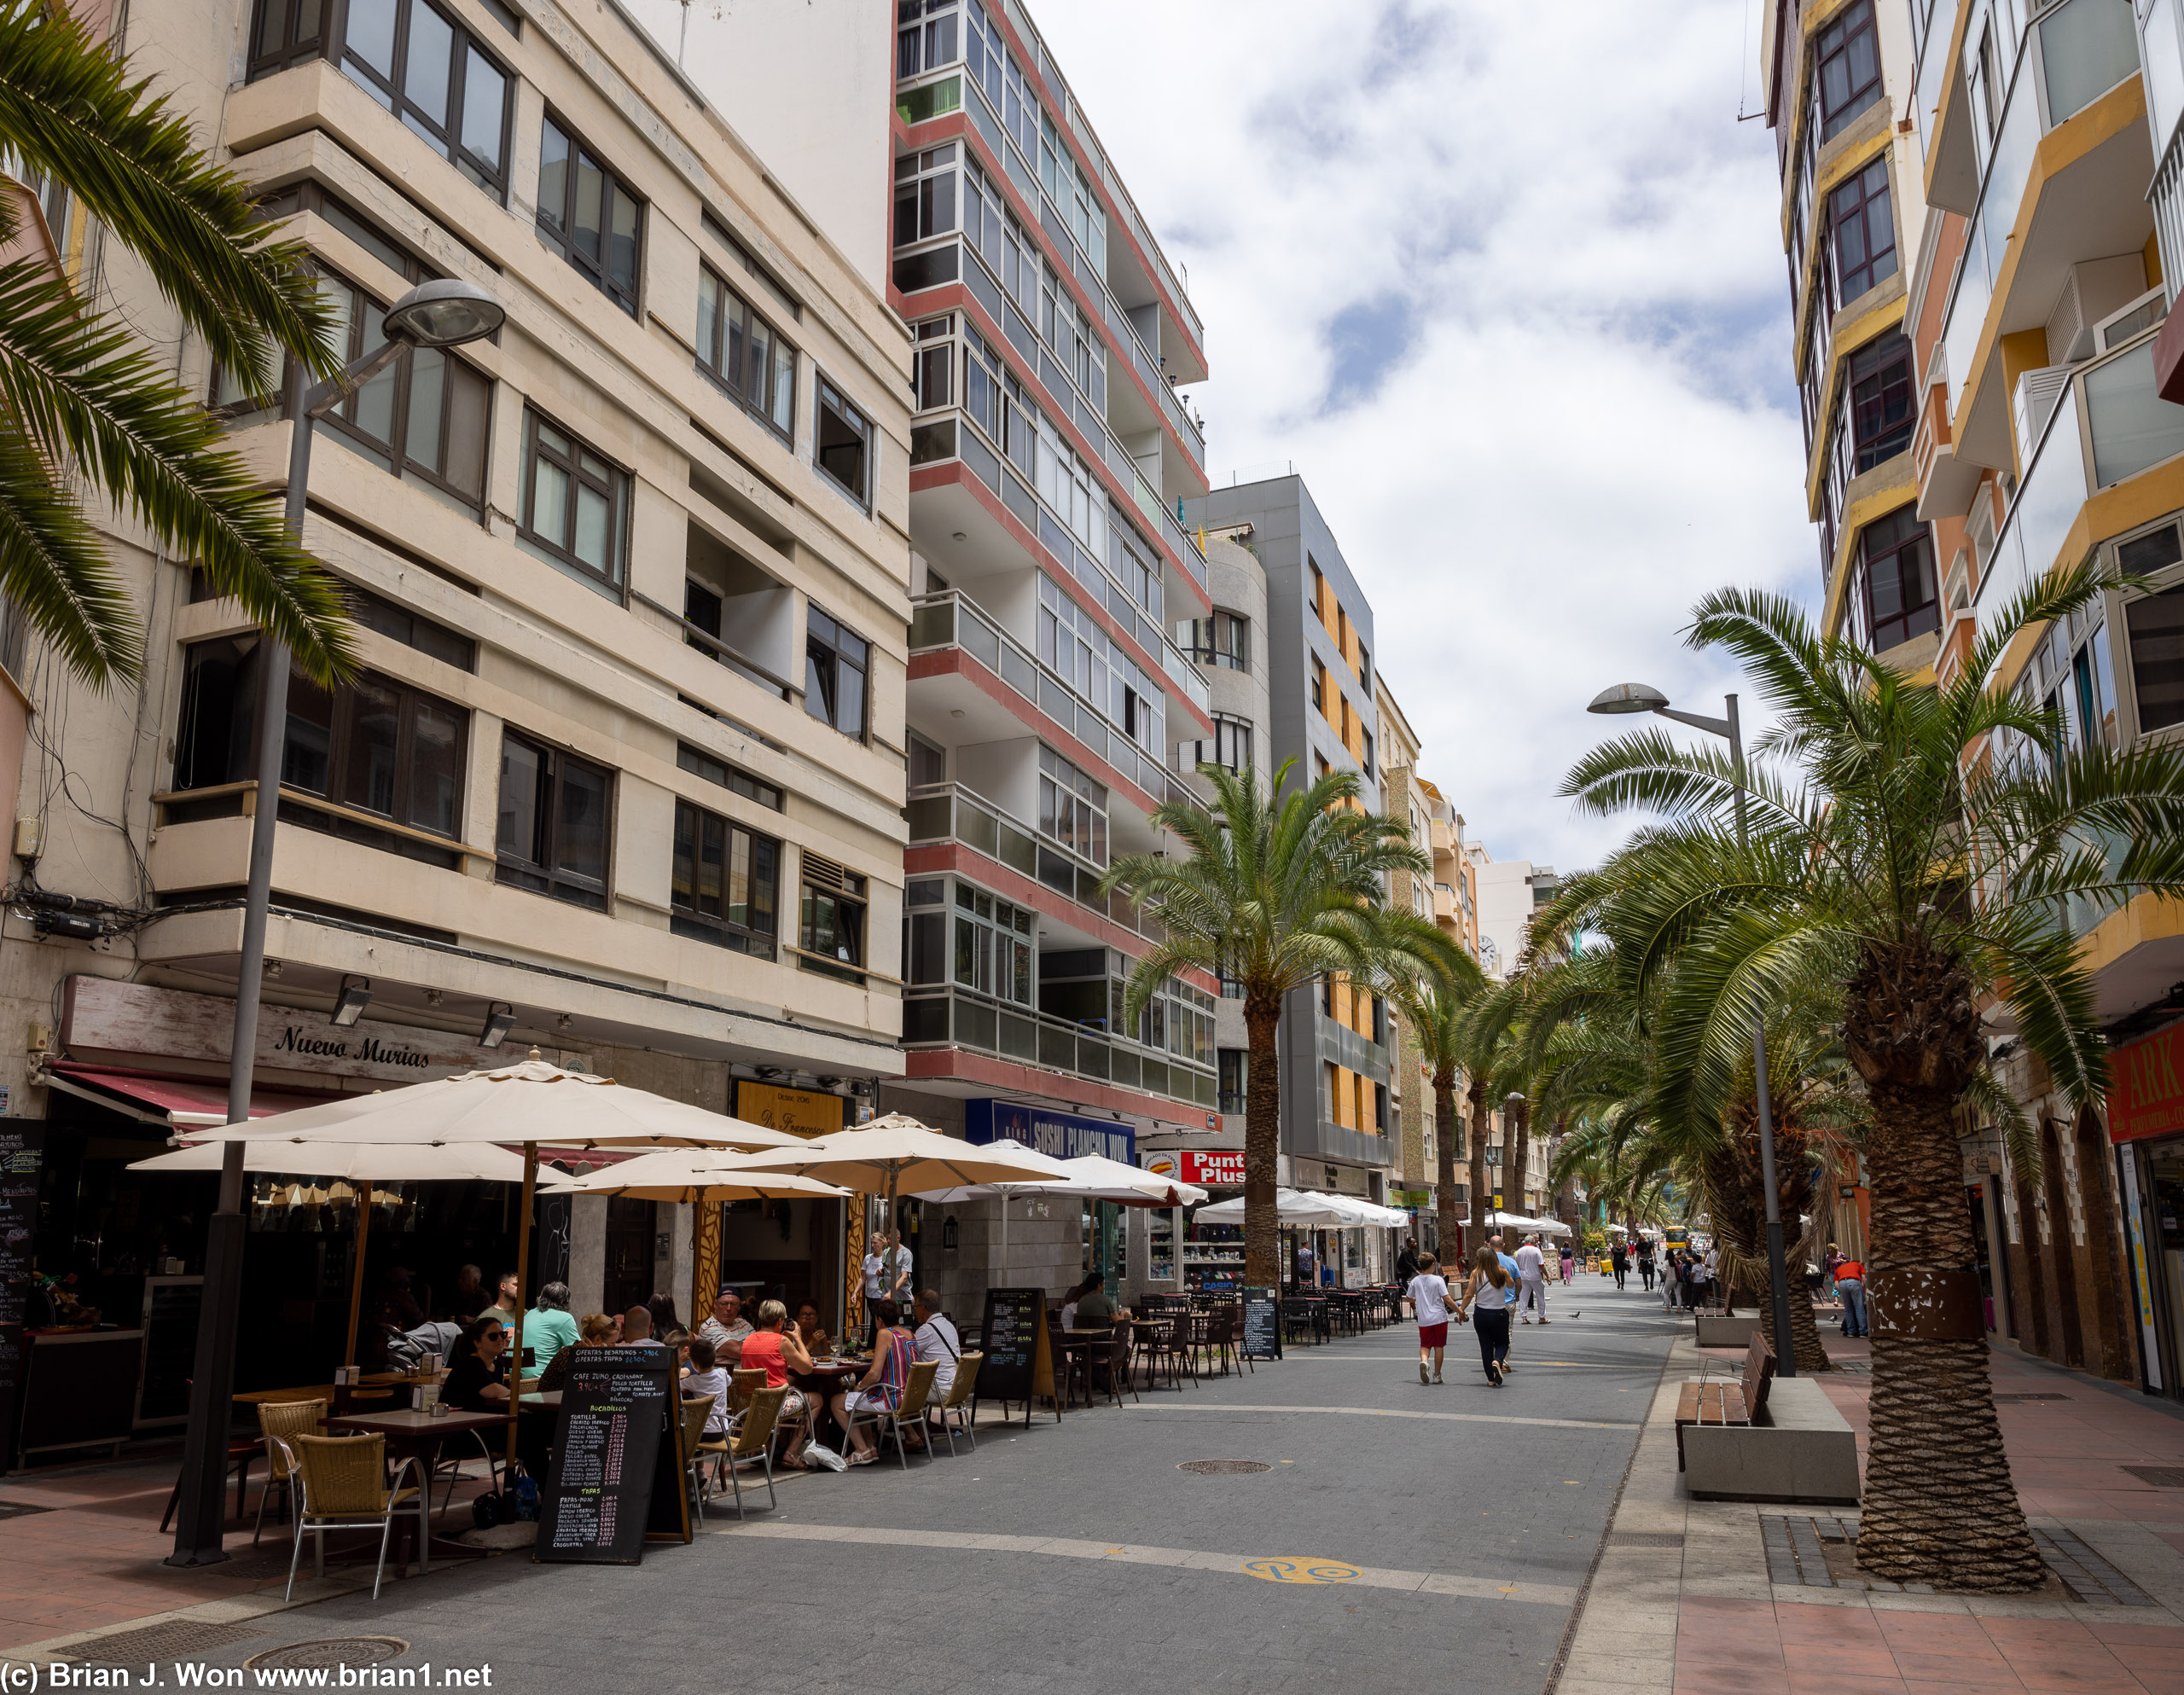 Outdoor dining and pedestrian-friendly streets.